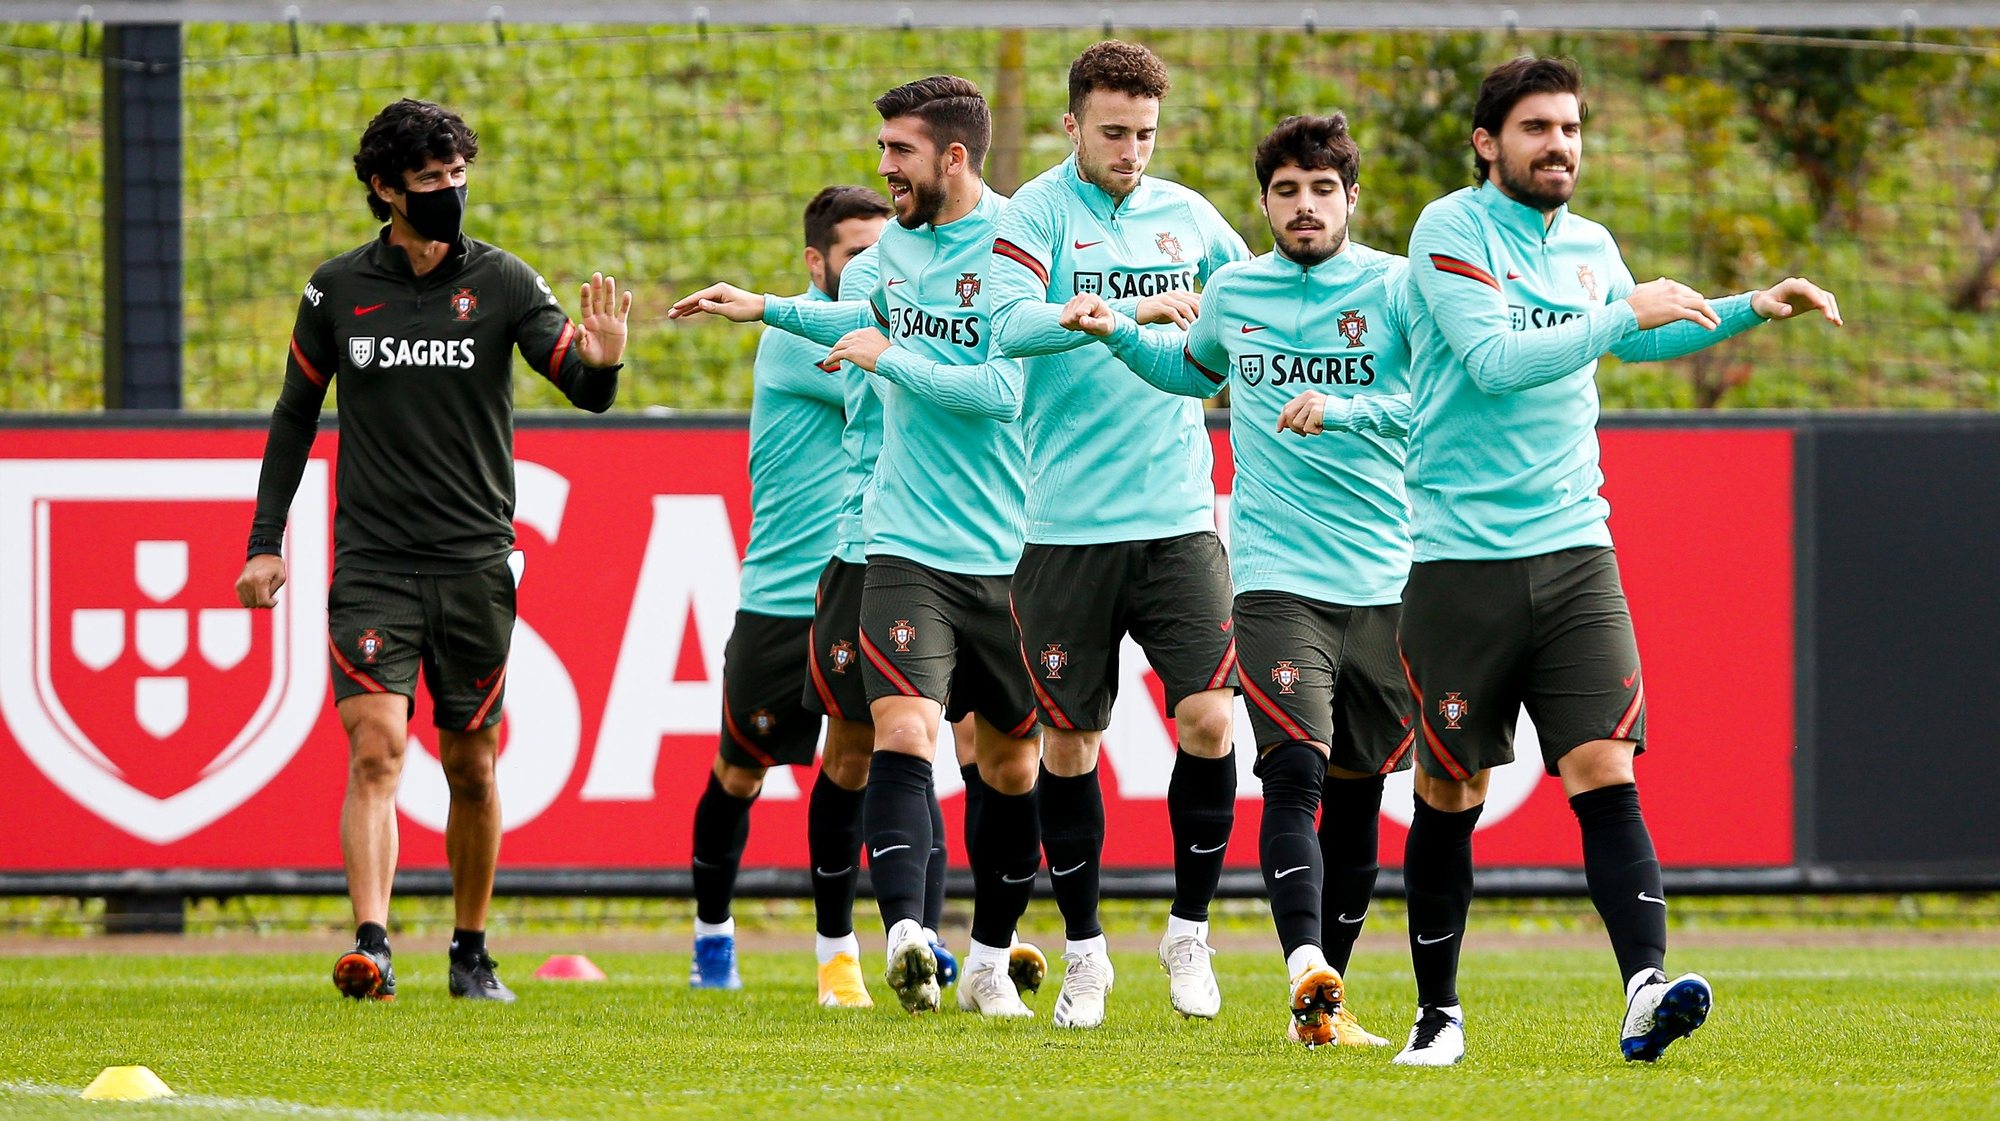 epa08821982 A handout photo made available by Portuguese Football Federation (FPF) shows Portugal players during a training session for the upcoming UEFA Nations League match against Croatia, in Oeiras, Portugal, 15 November 2020.  EPA/DIOGO PINTO / HANDOUT  HANDOUT EDITORIAL USE ONLY/NO SALES